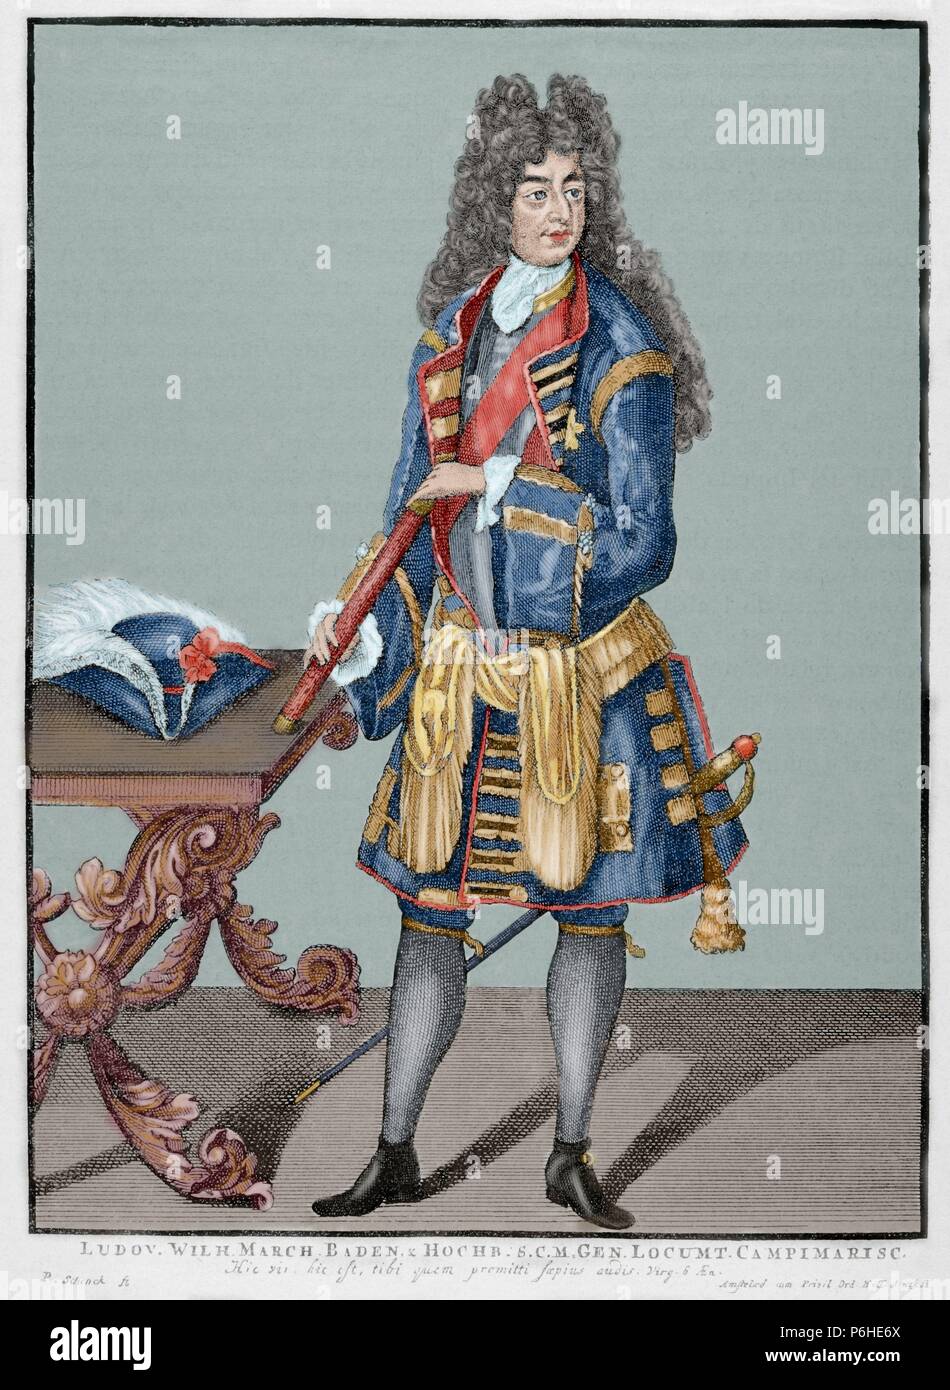 Louis William, Margrave of Baden-Baden (1655-1707). Reduced facsimile after the engraving of Peter Schenk (1645-1715). Universal History, 1881. Colored. Stock Photo